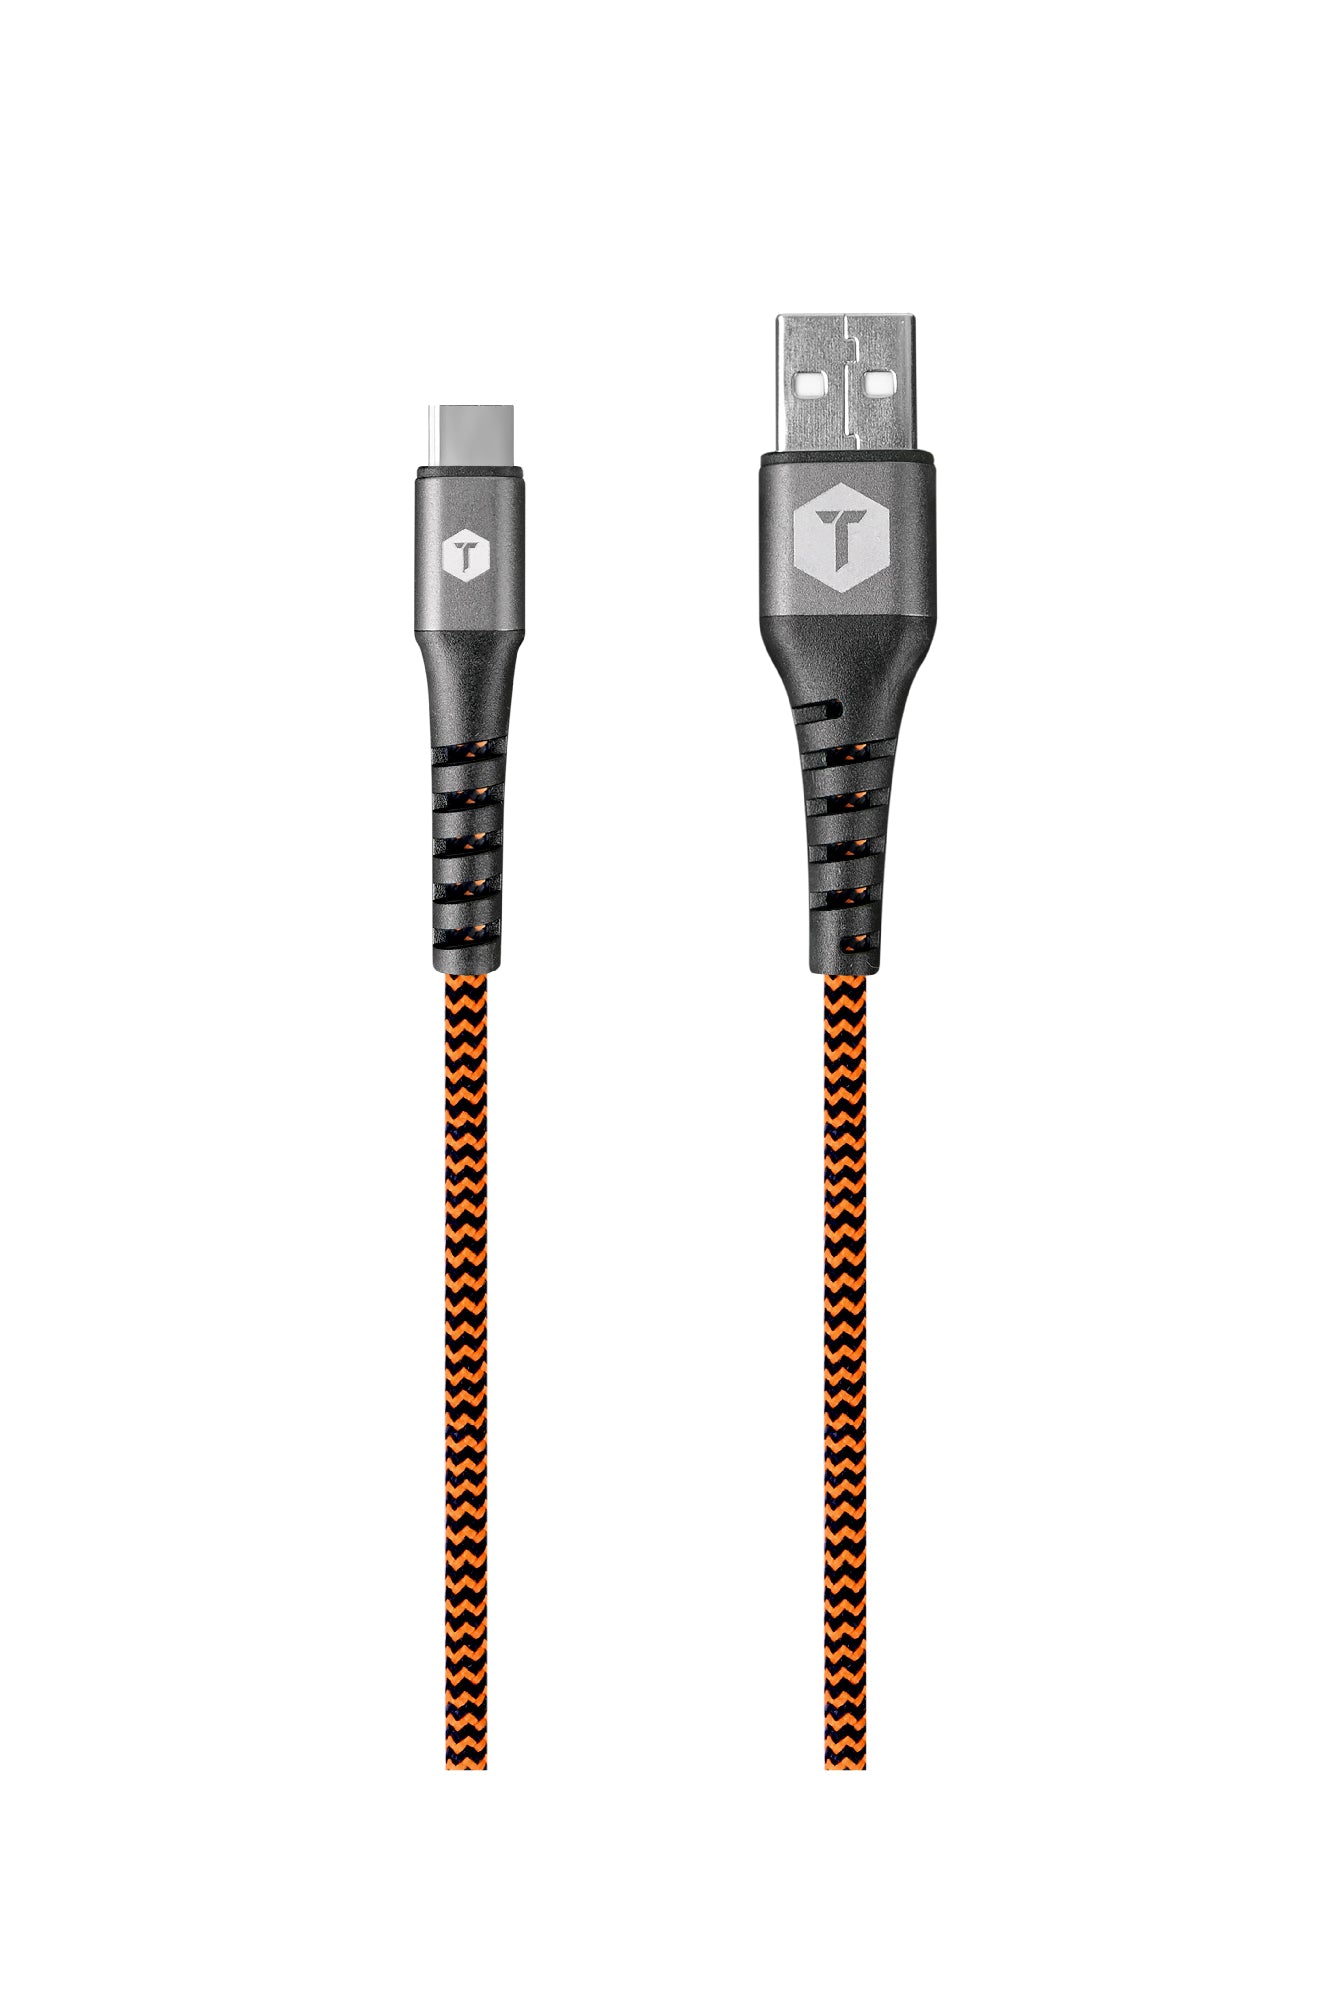 Braided 6 Ft. Power/Data USB-A to USB-C Cable